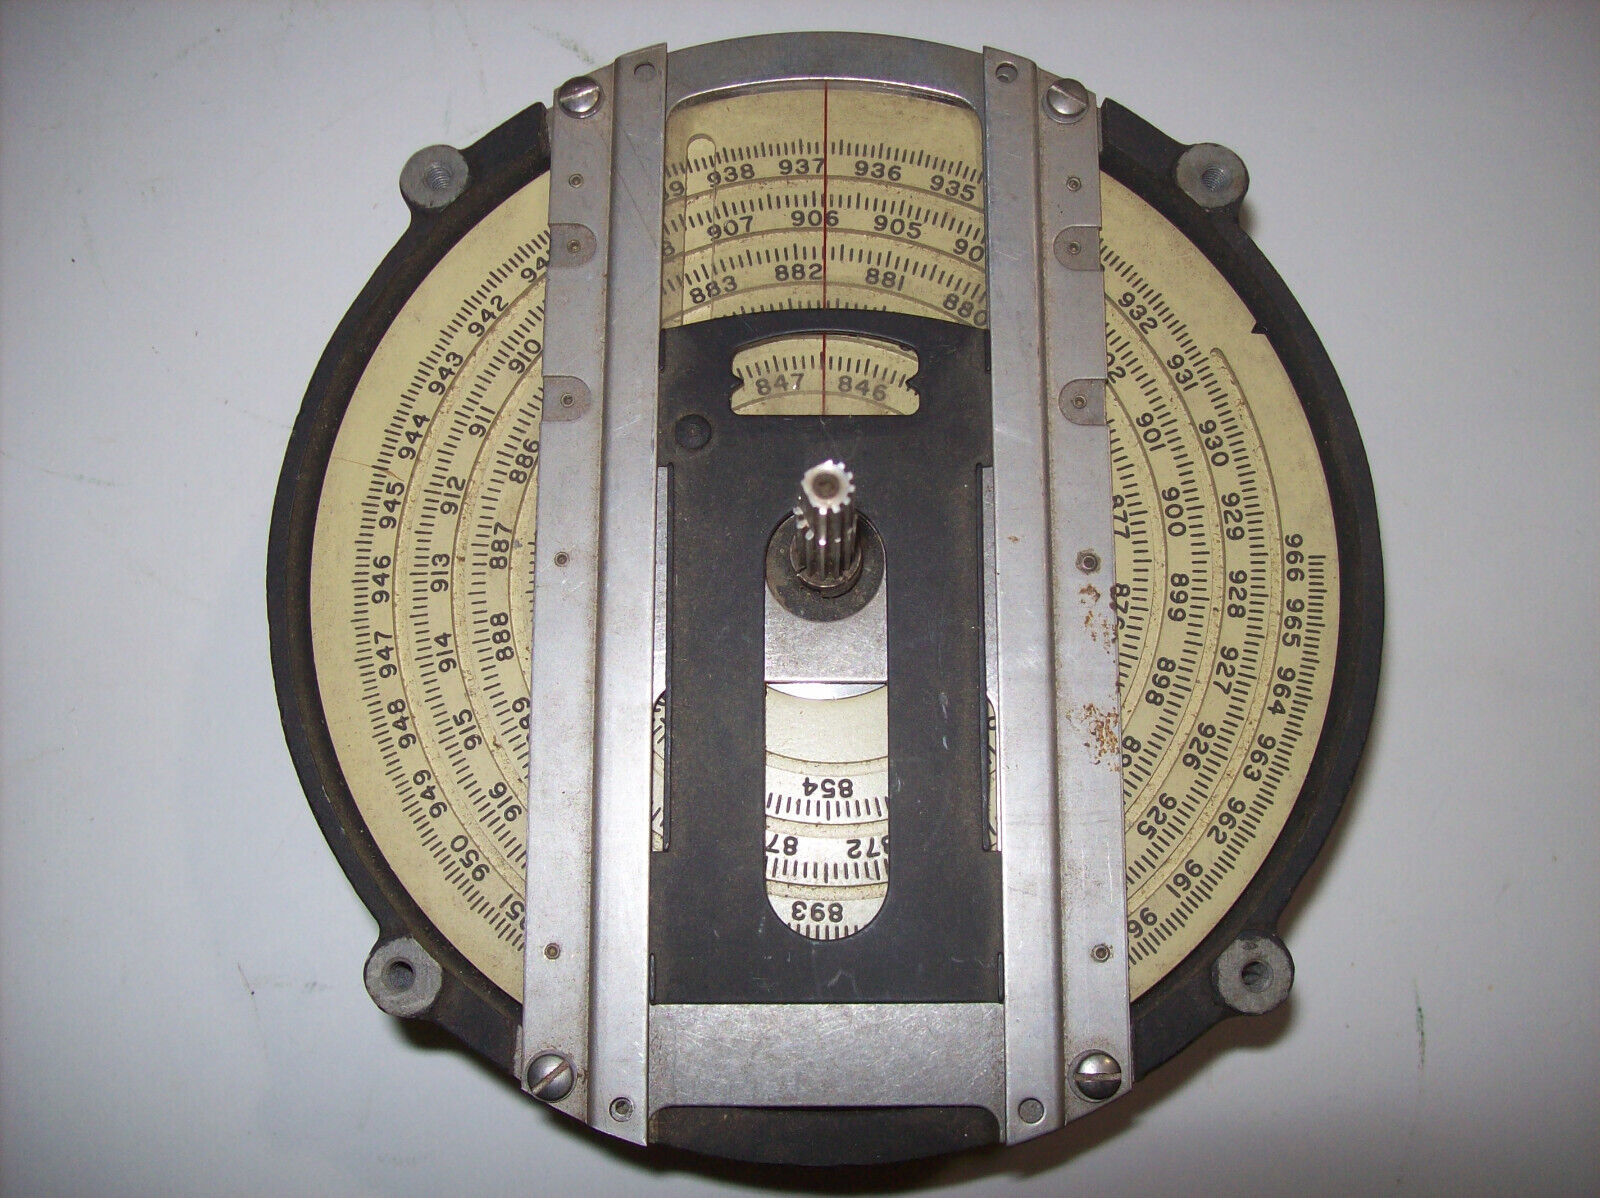 Vintage Multi-turn RADIO DIAL Scale From 833-966 in a Sliding Window, GENERAL(?)